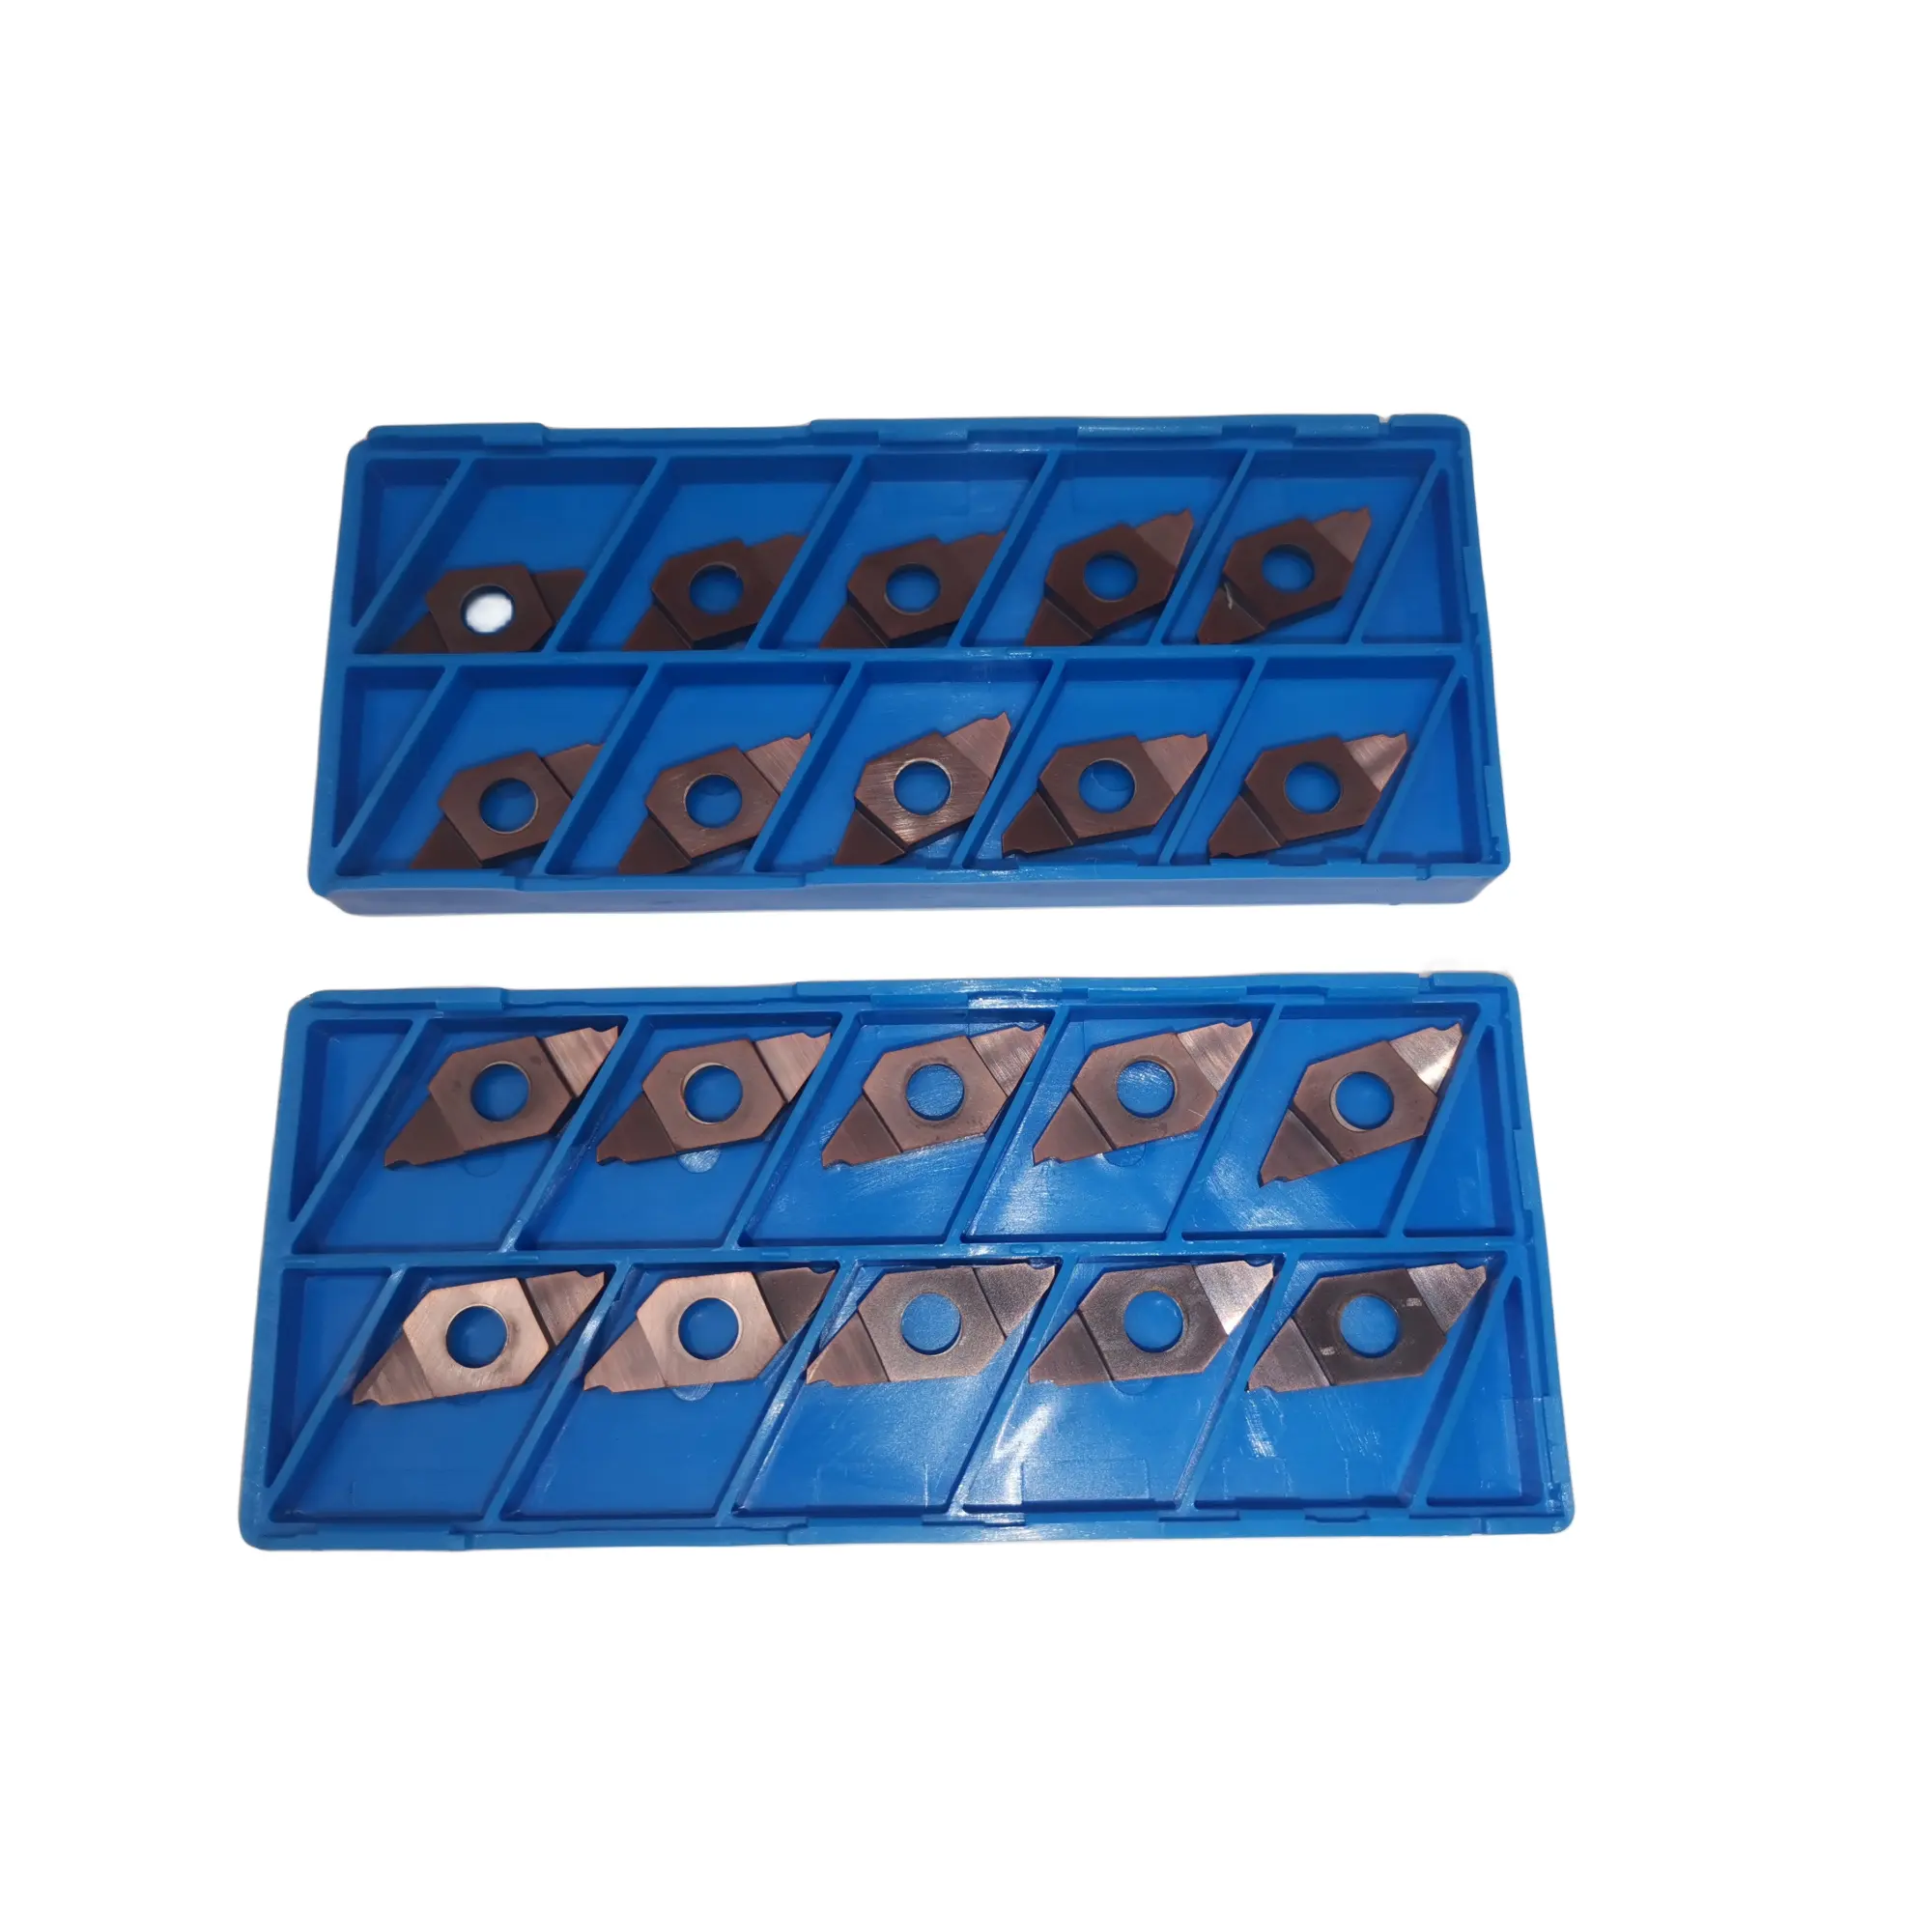 TKF12 TKF16 inserts machining for micro and small diameters with minimum cut-off width of 0.5mm